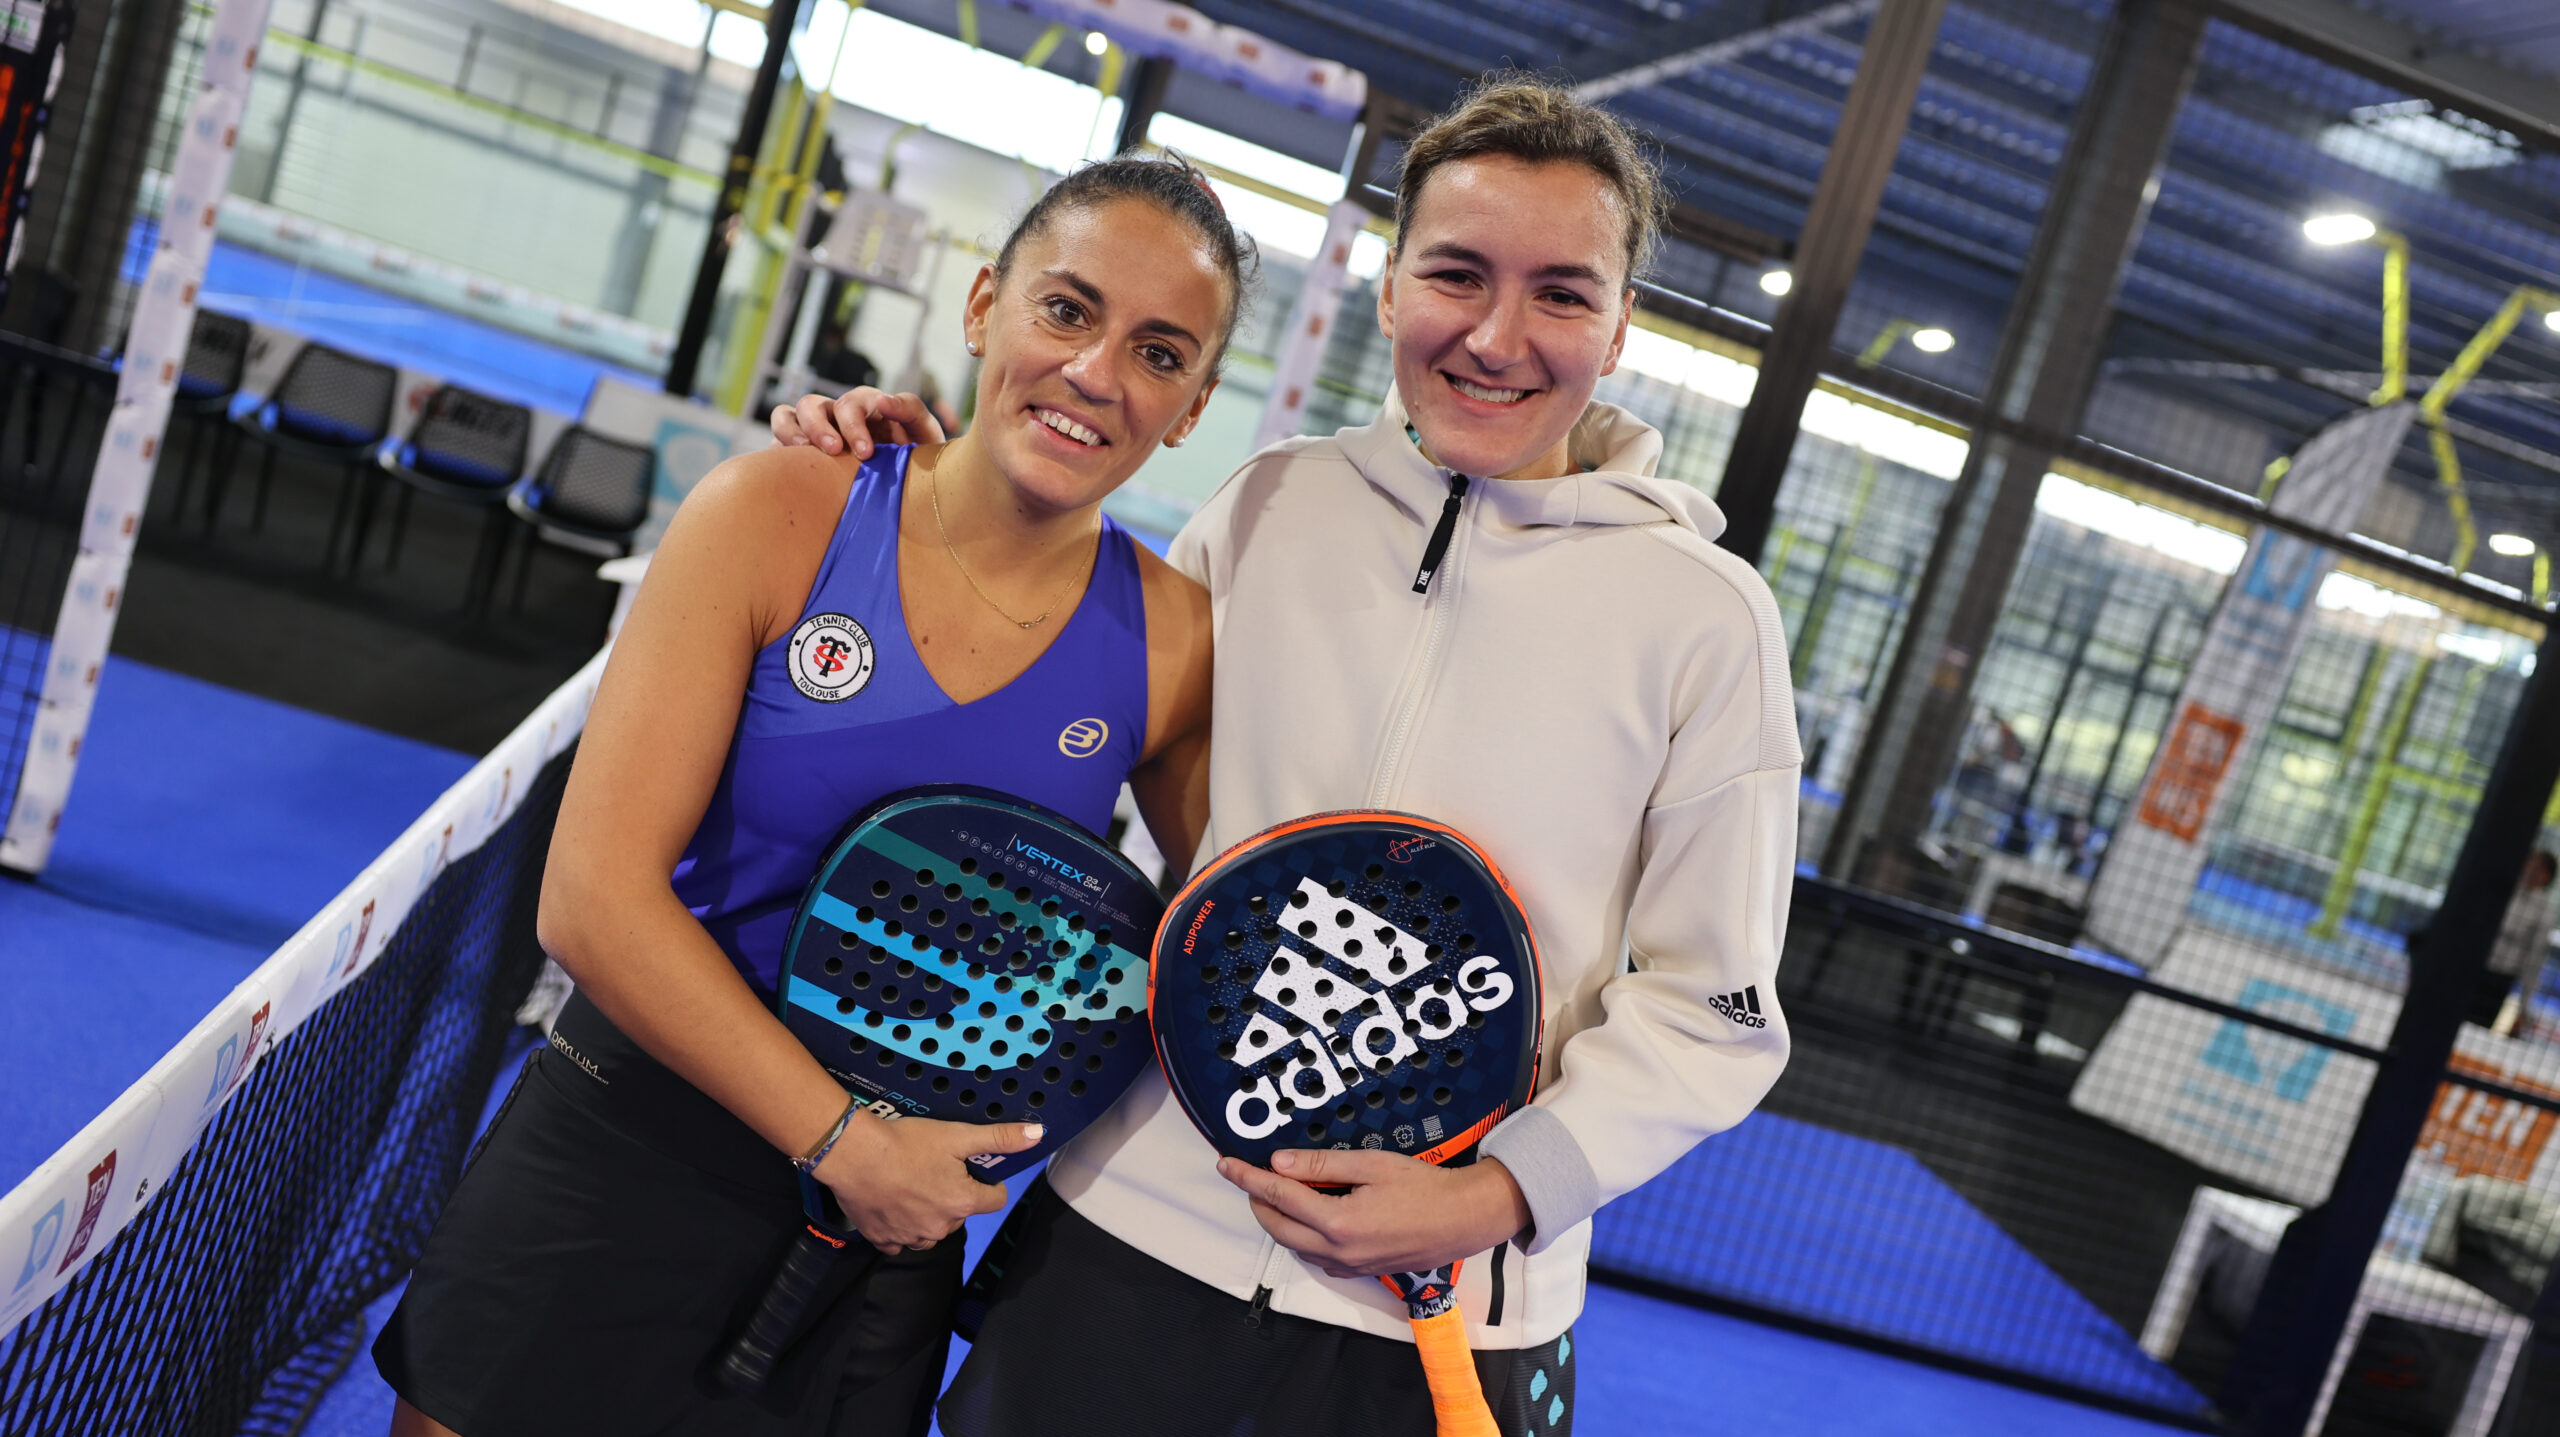 sobrie invernon fft padel tour Toulouse